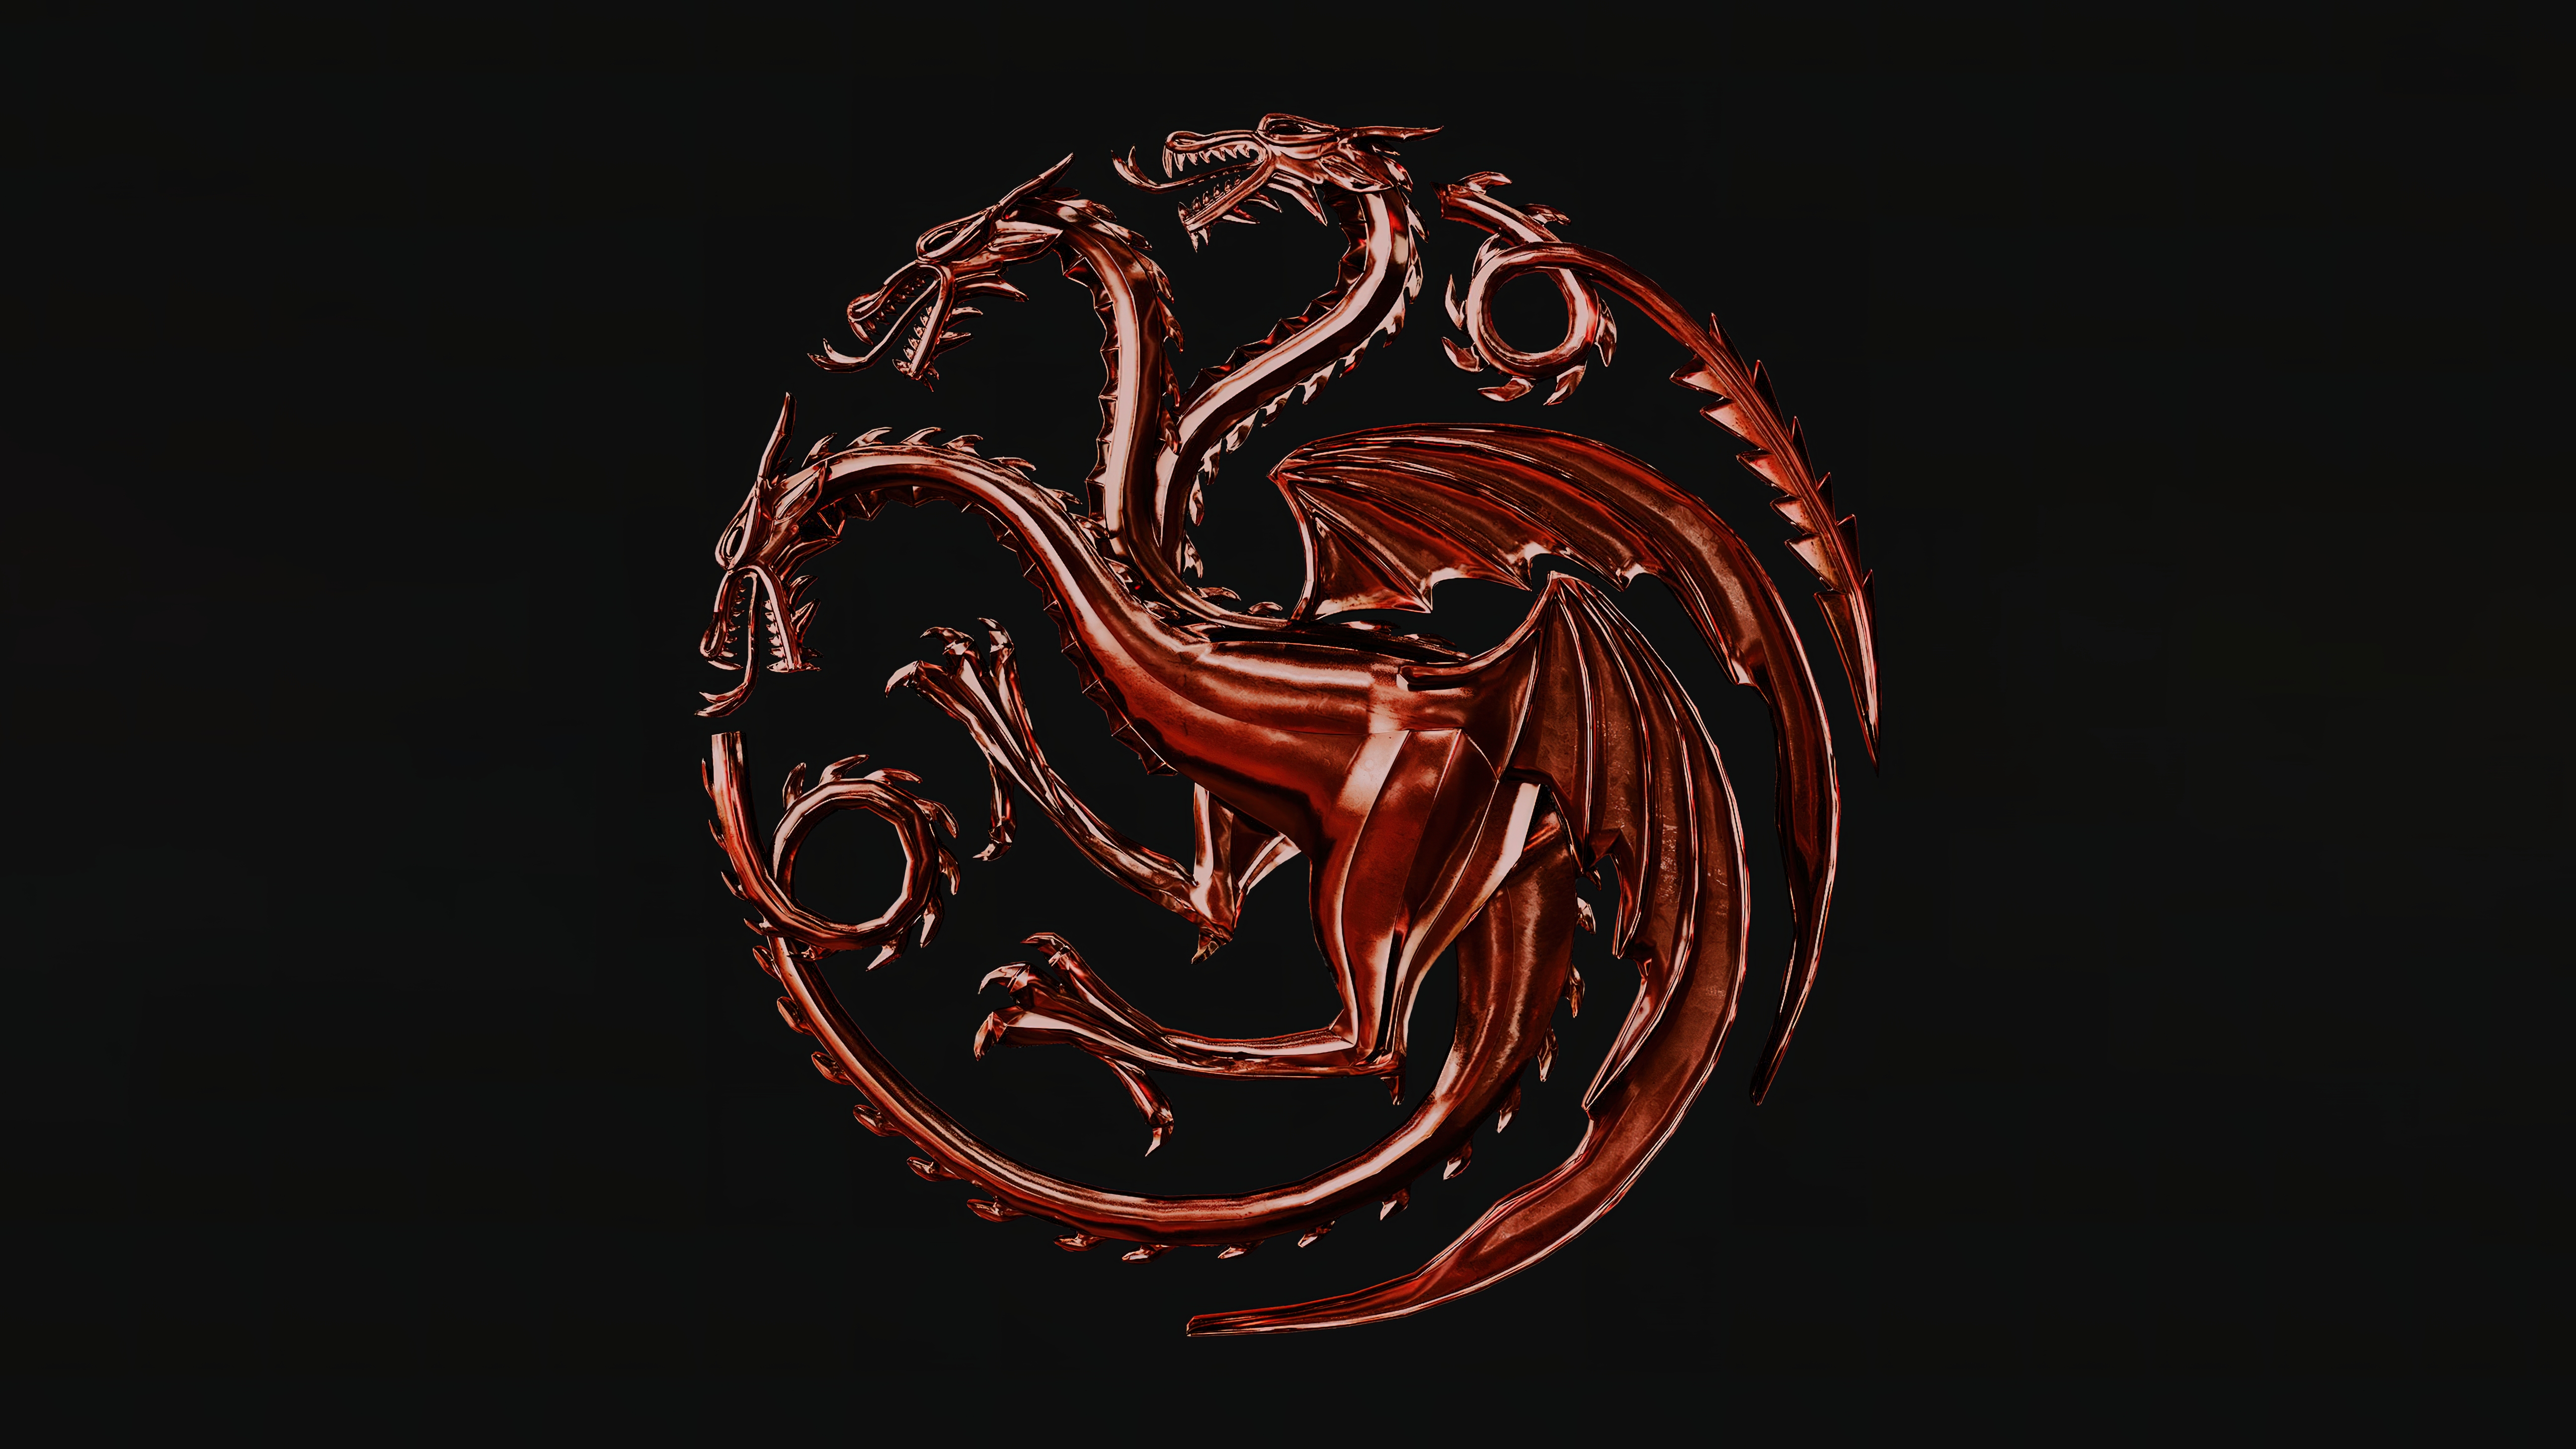 HD wallpaper, Amoled, 5K, Hbo Series, House Of The Dragon, Black Background, Tv Series, 2022 Series